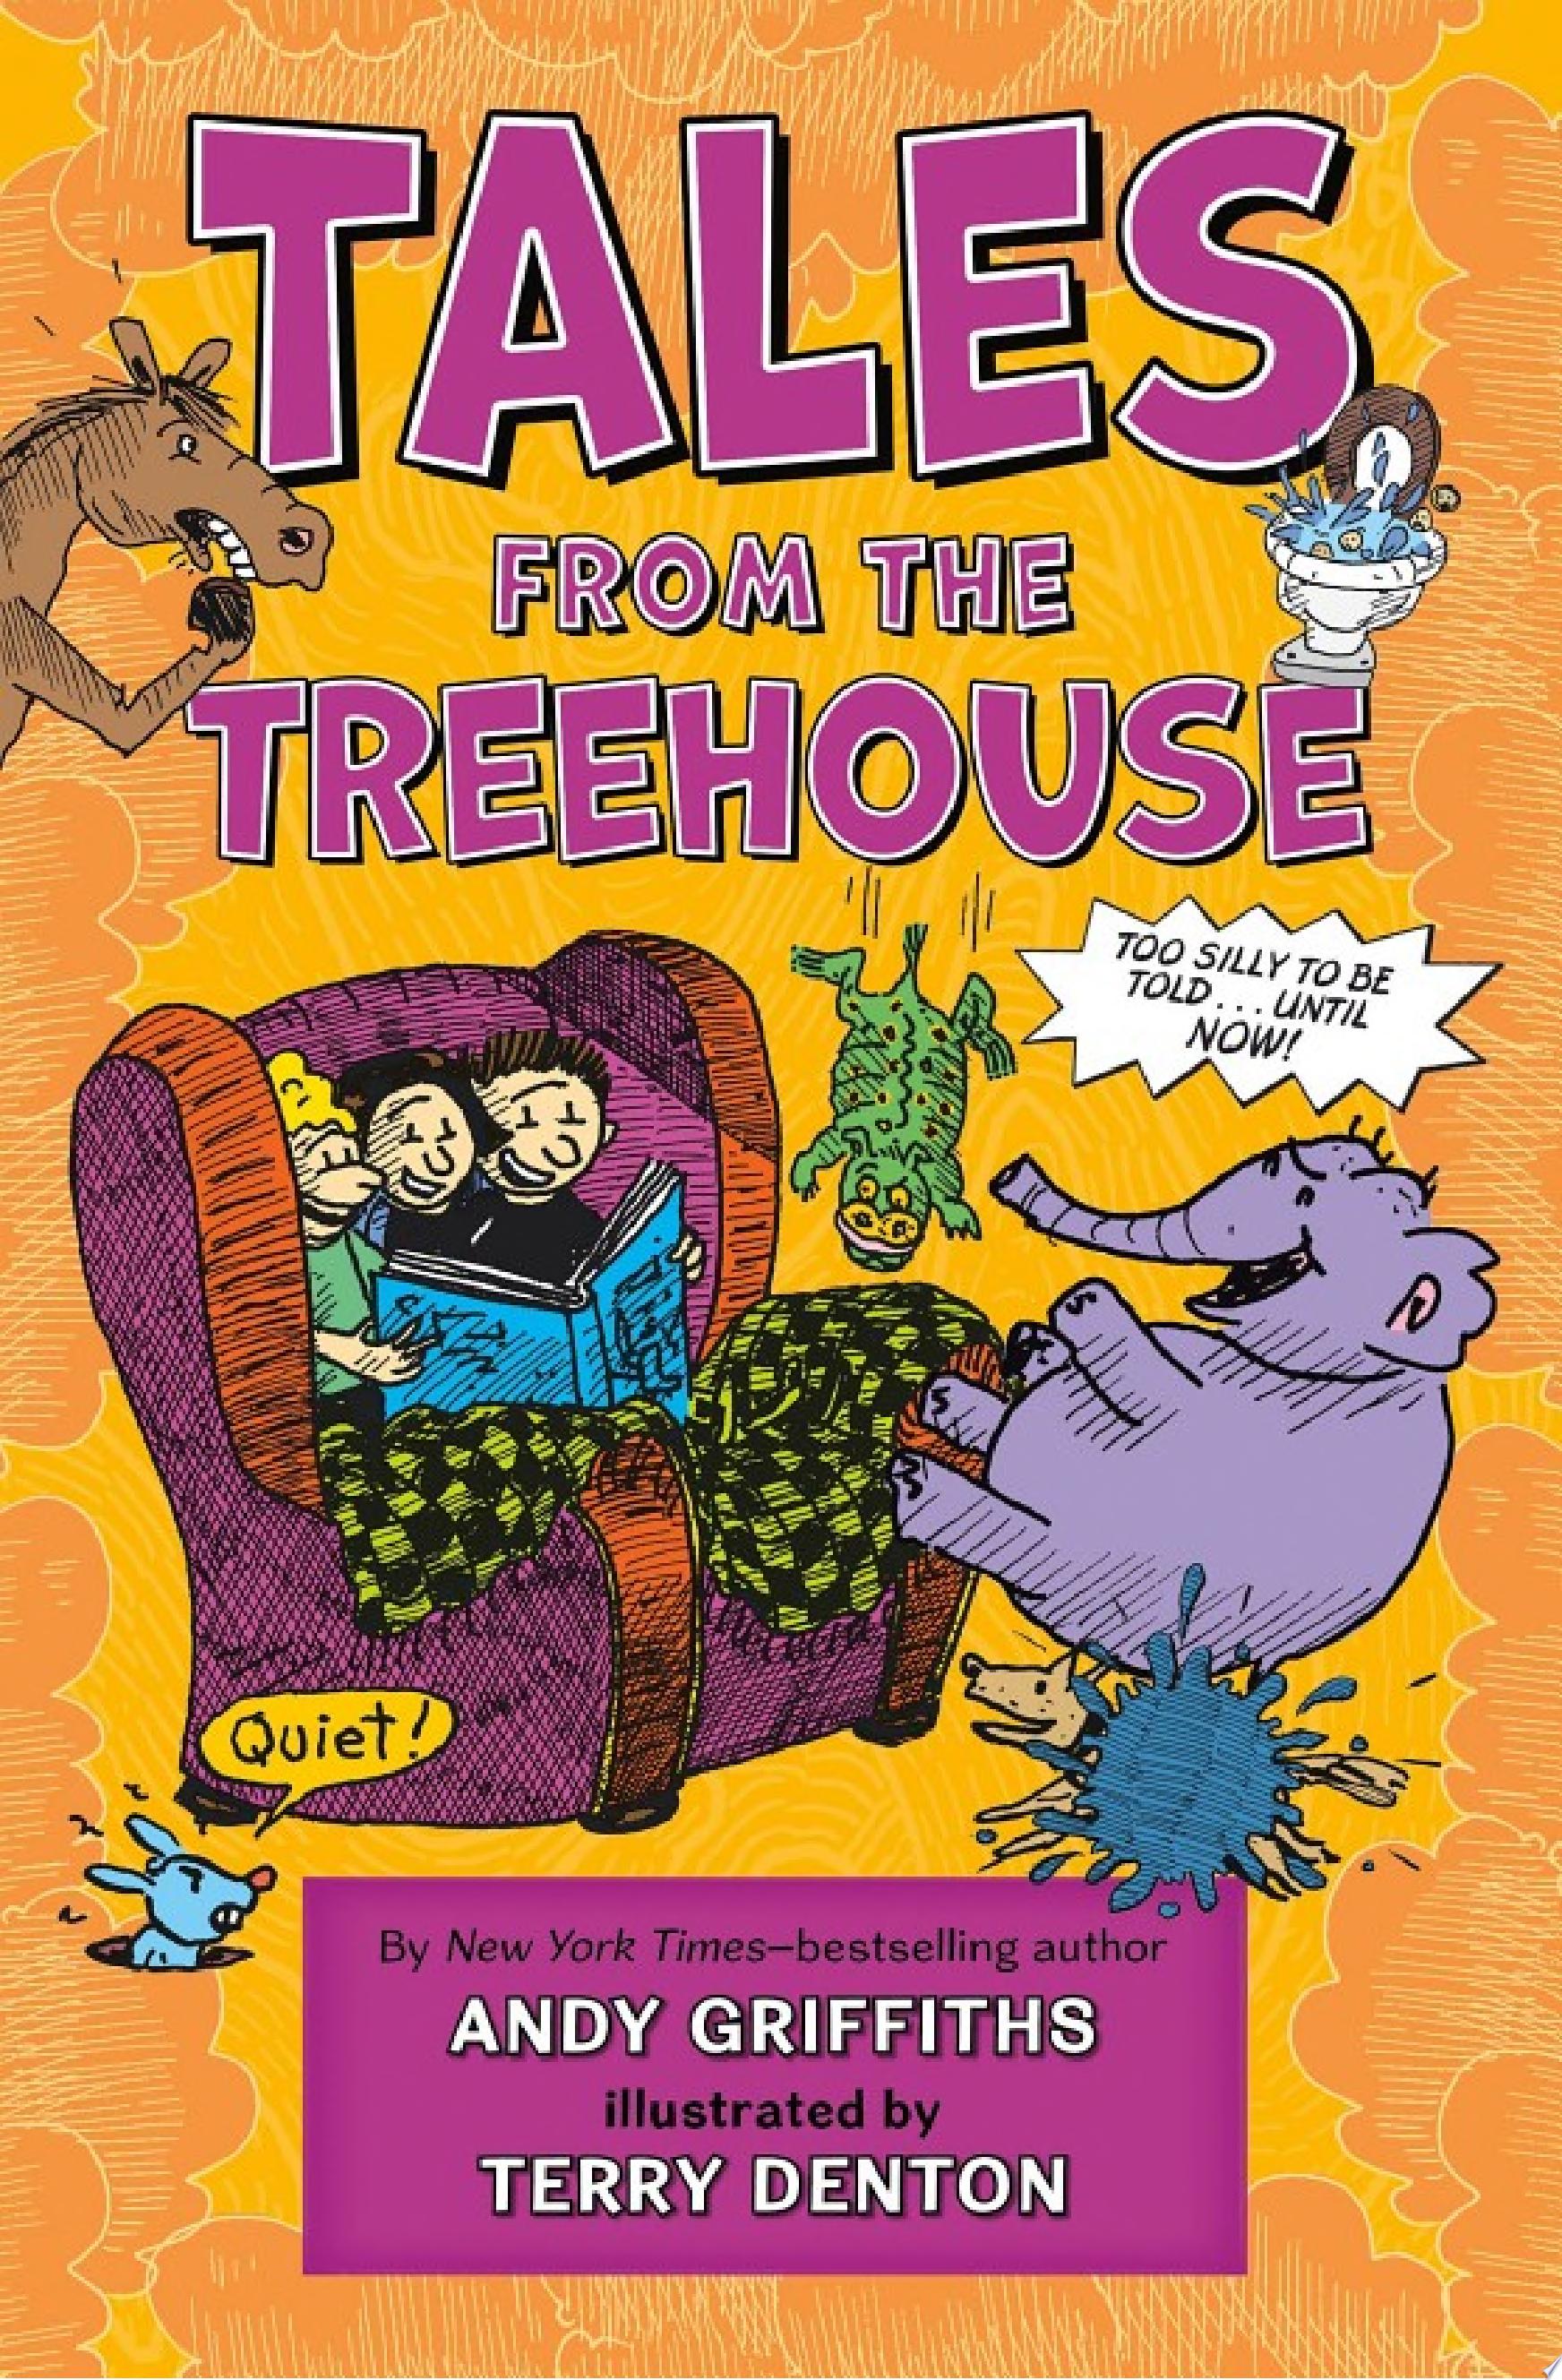 Image for "Tales from the Treehouse"